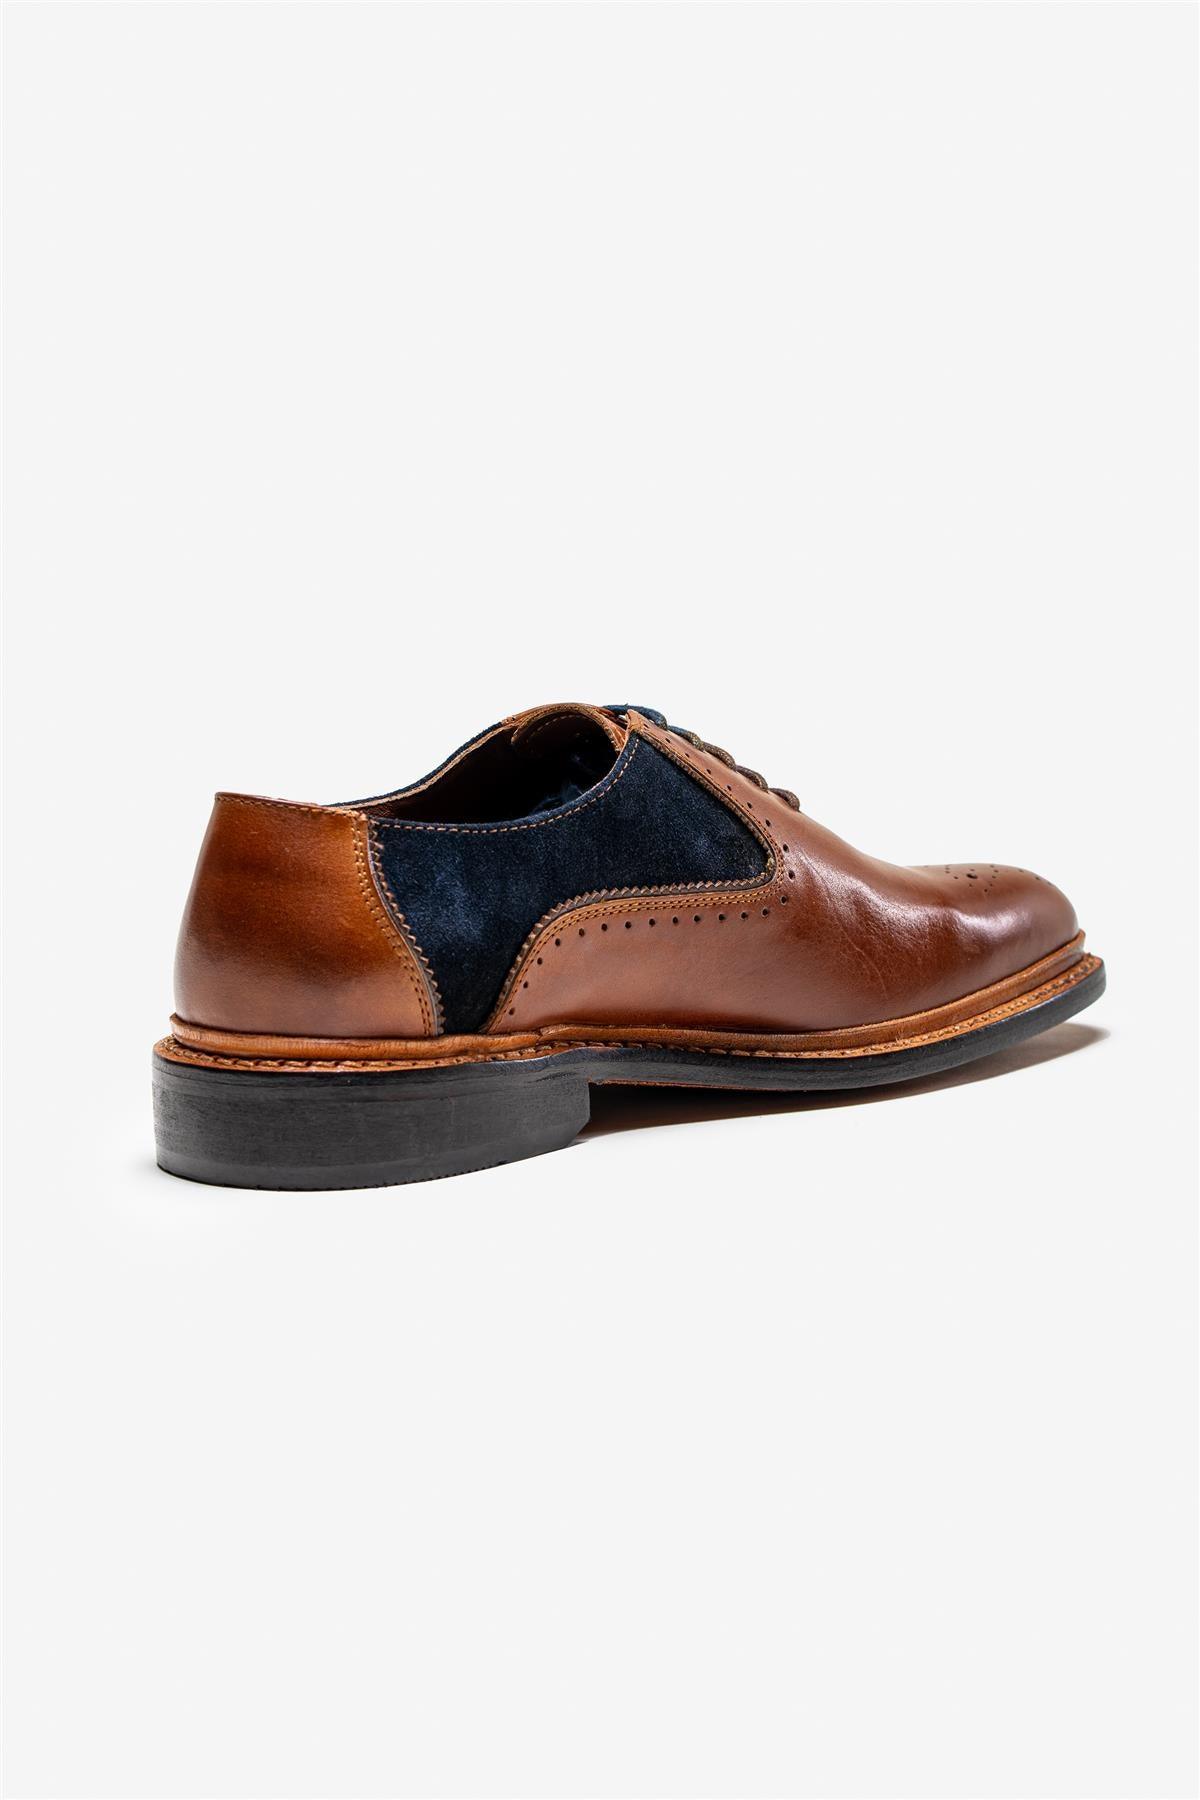 Brentwood tan/navy shoes back